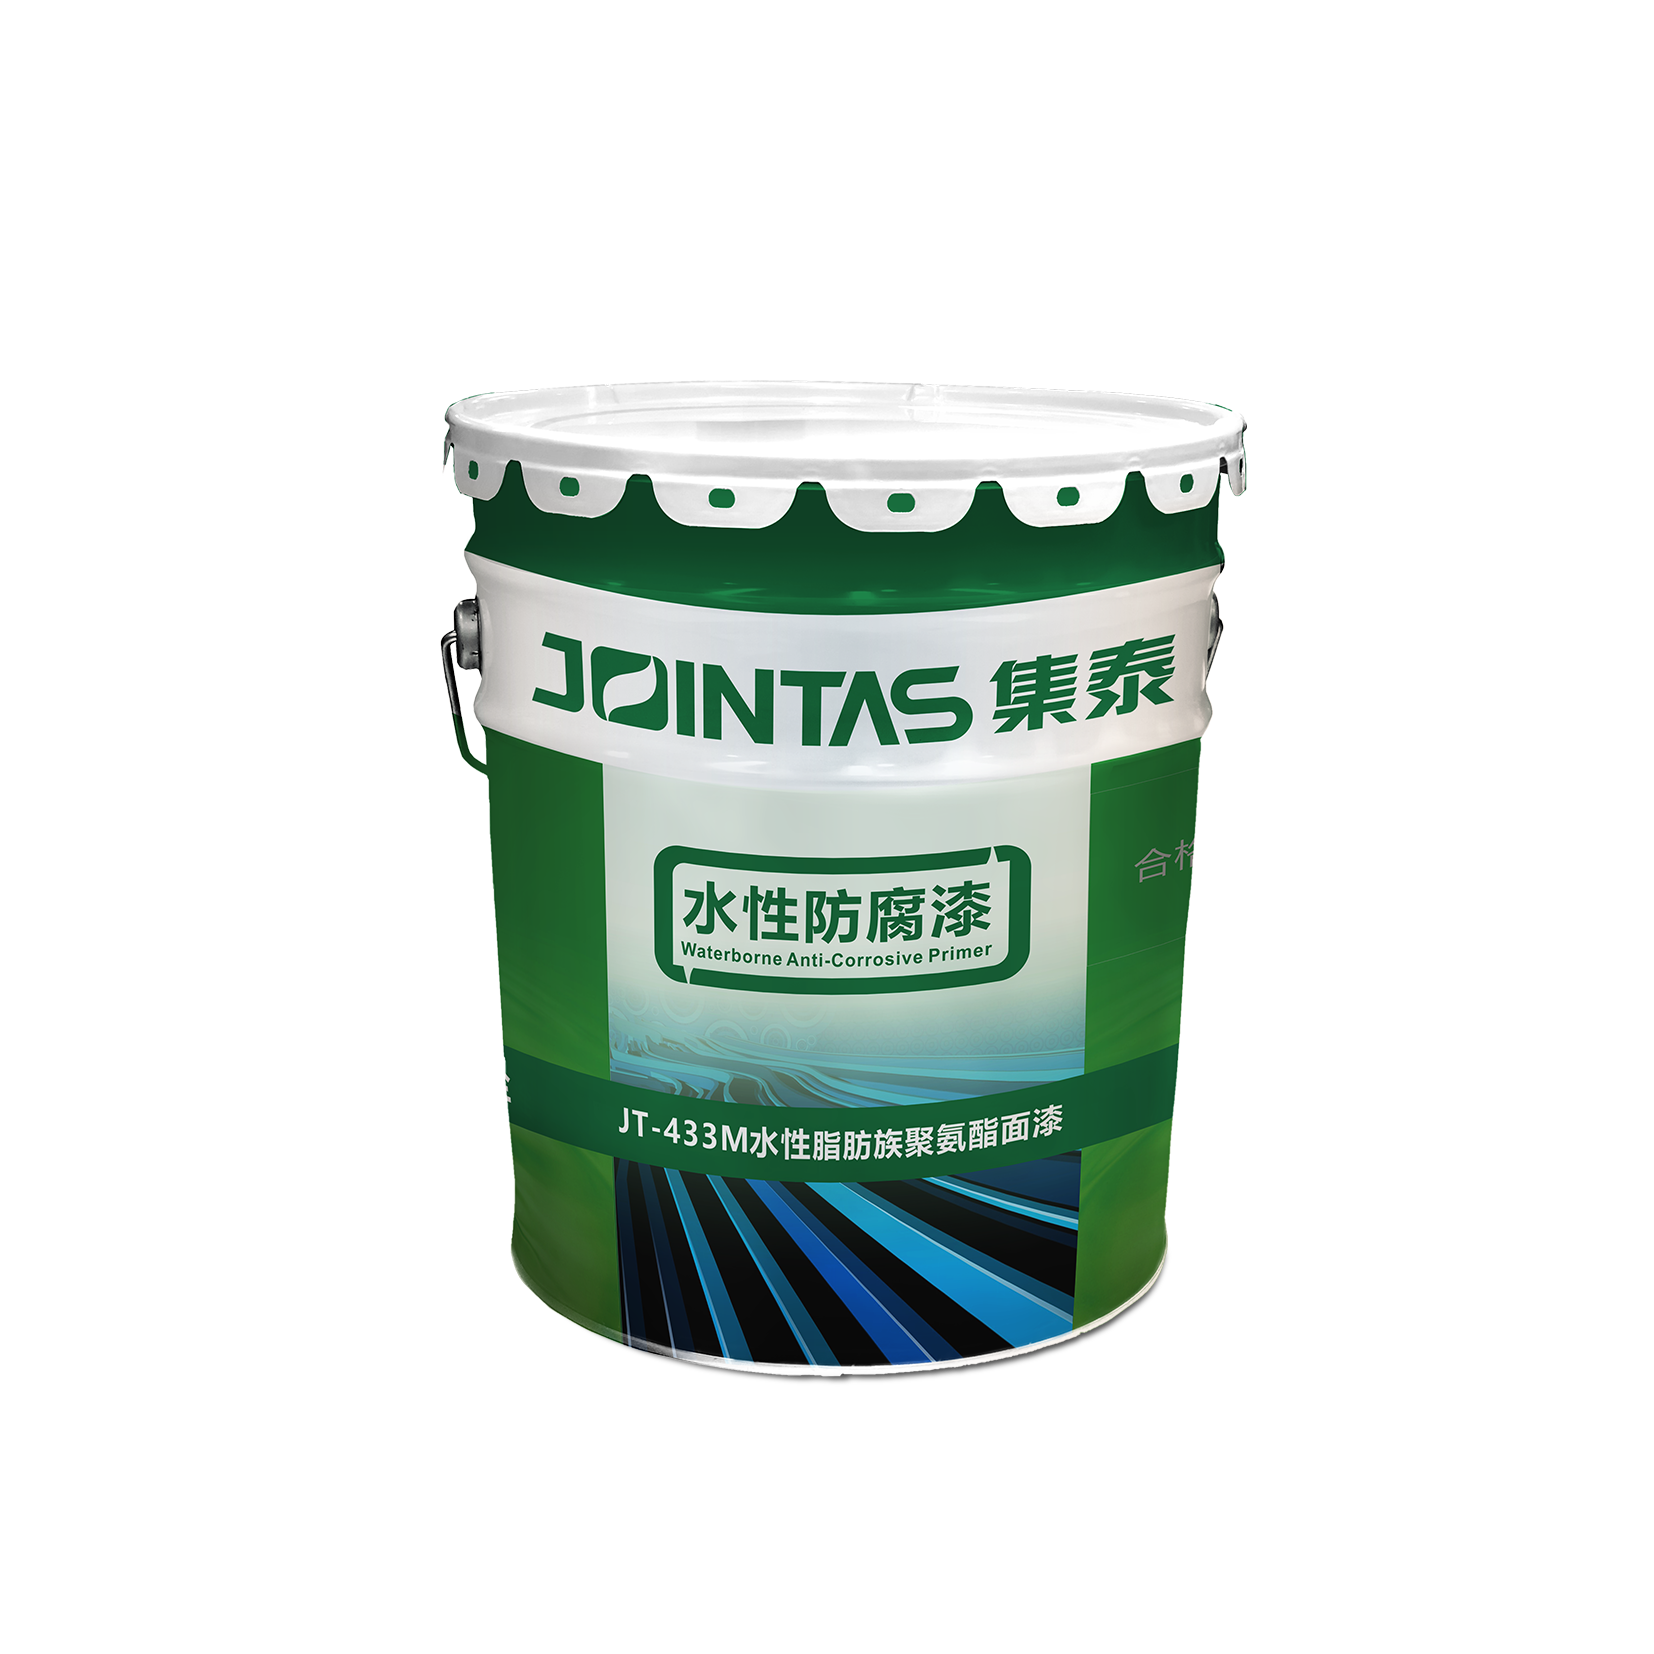 JT-433M Water-Based Two-Component Aliphatic Polyurethane Top coating paint